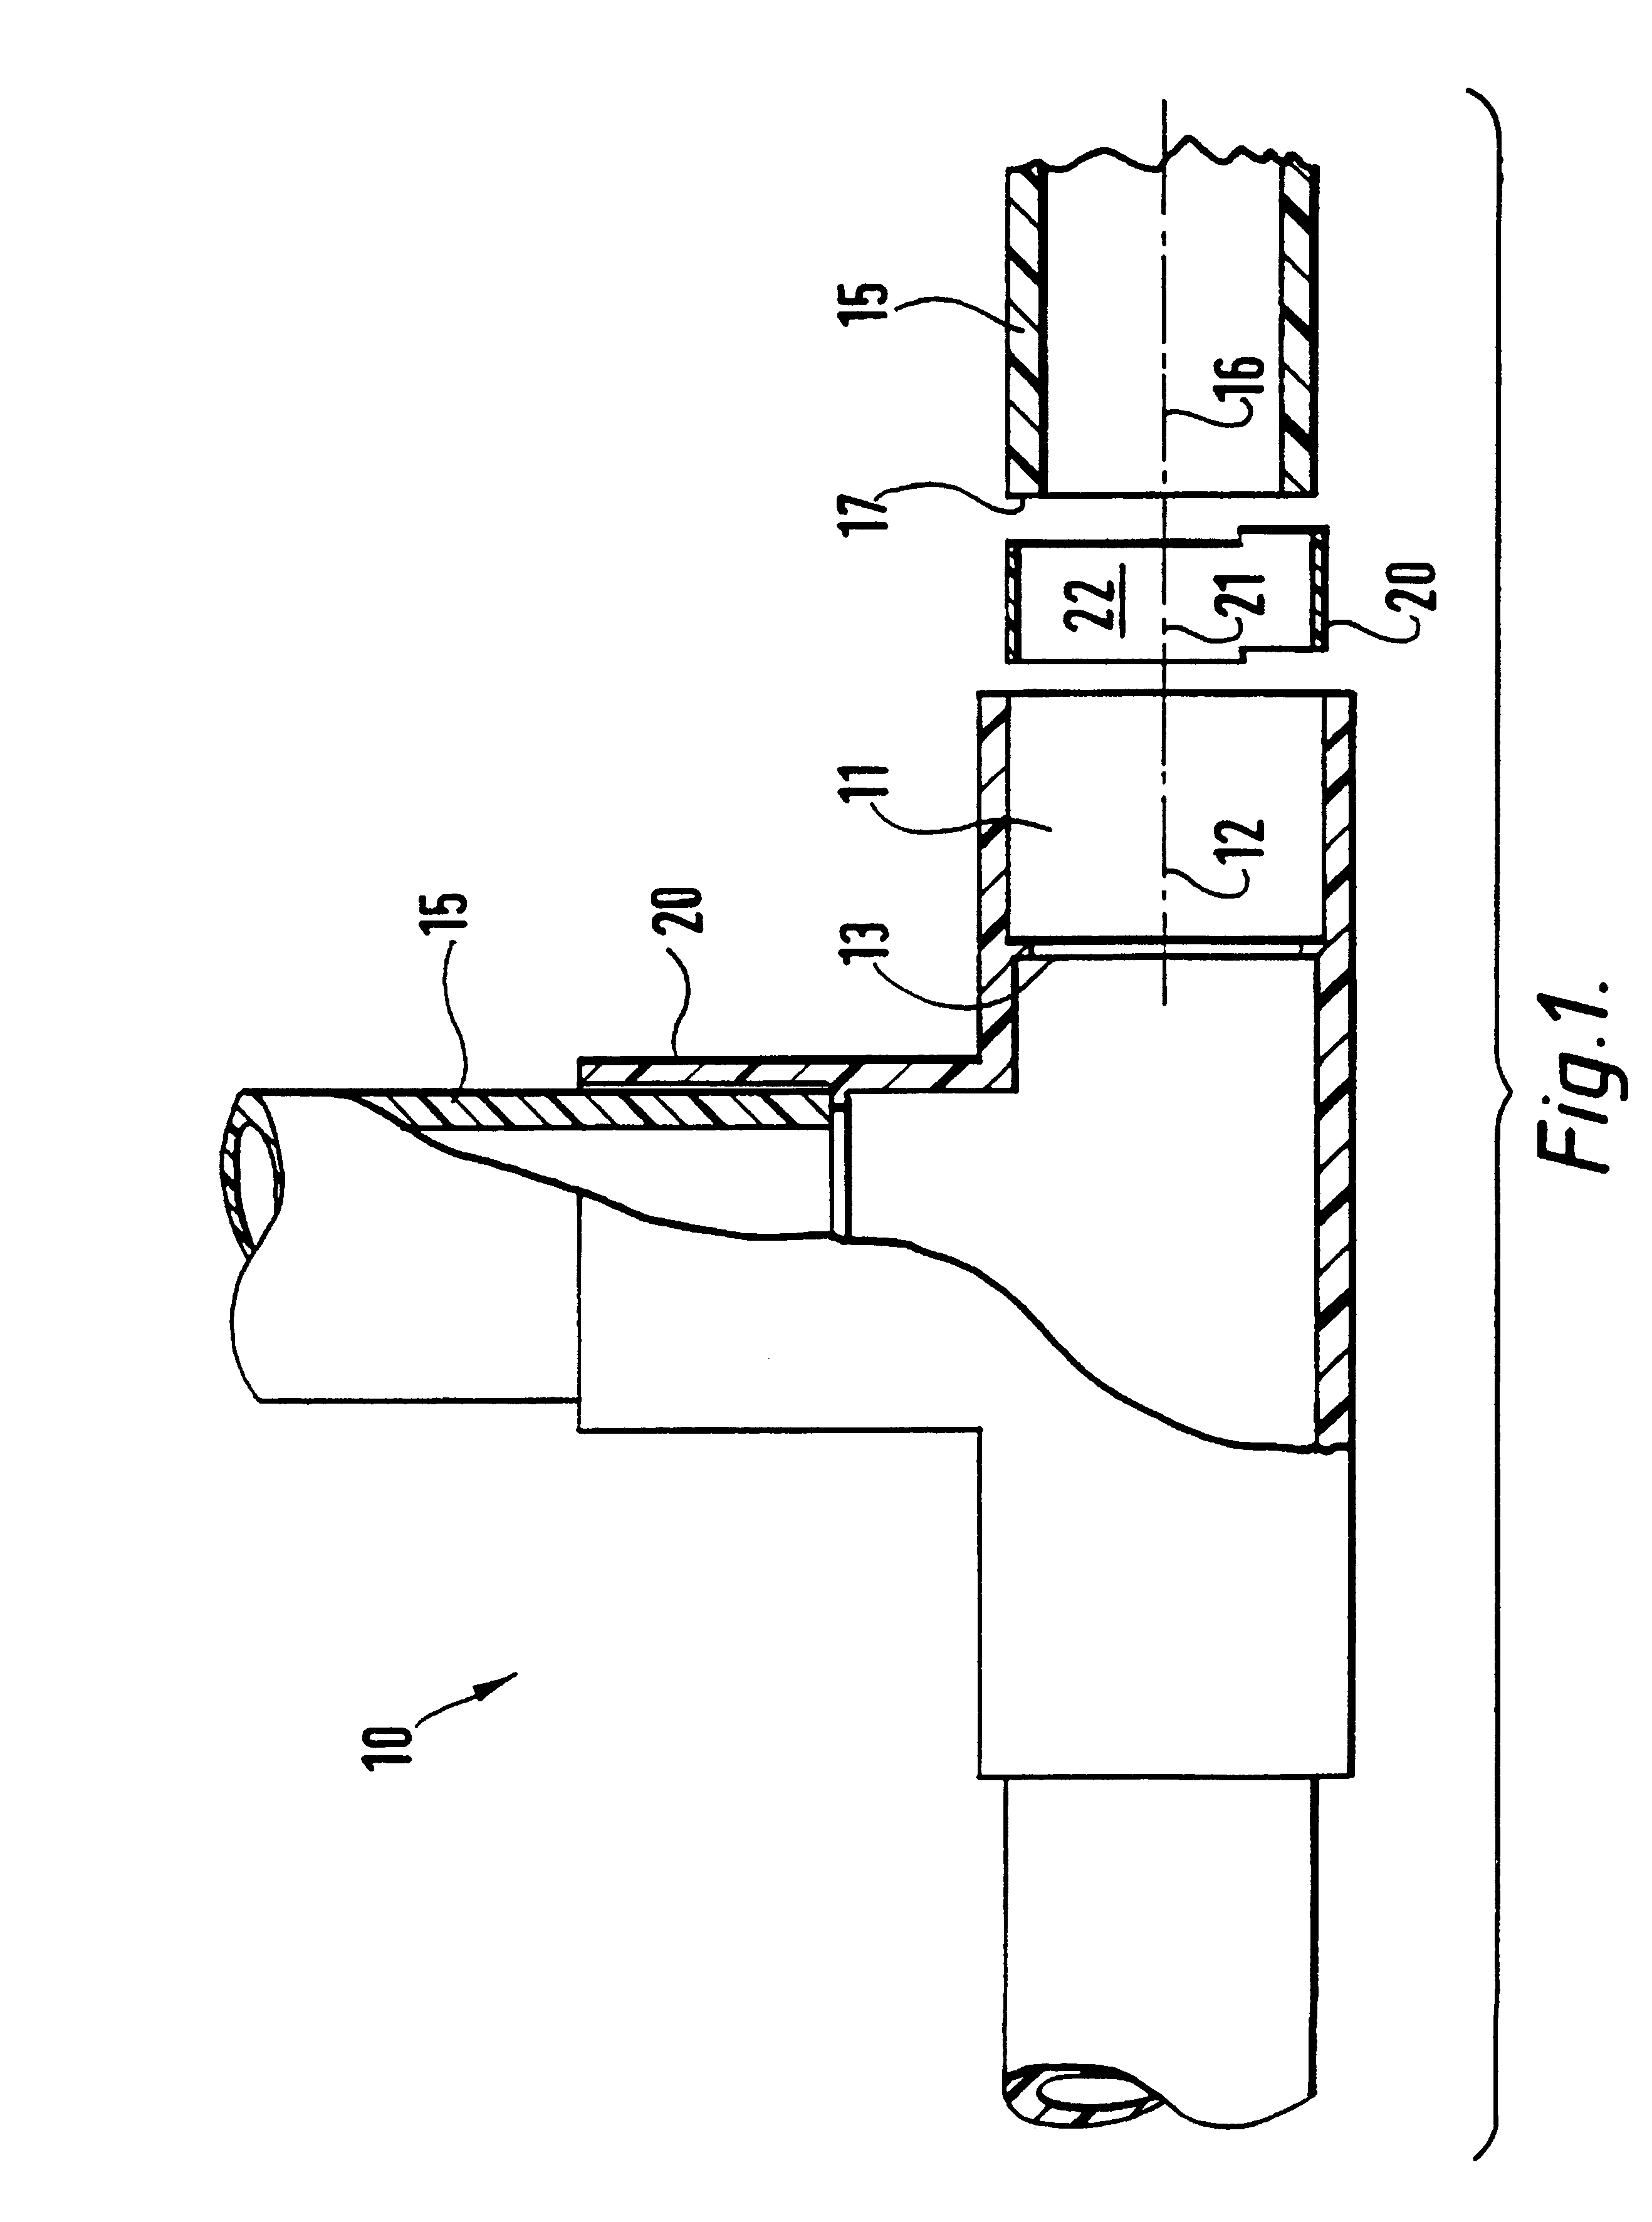 Apparatus and method for fusion joining a pipe and fittings